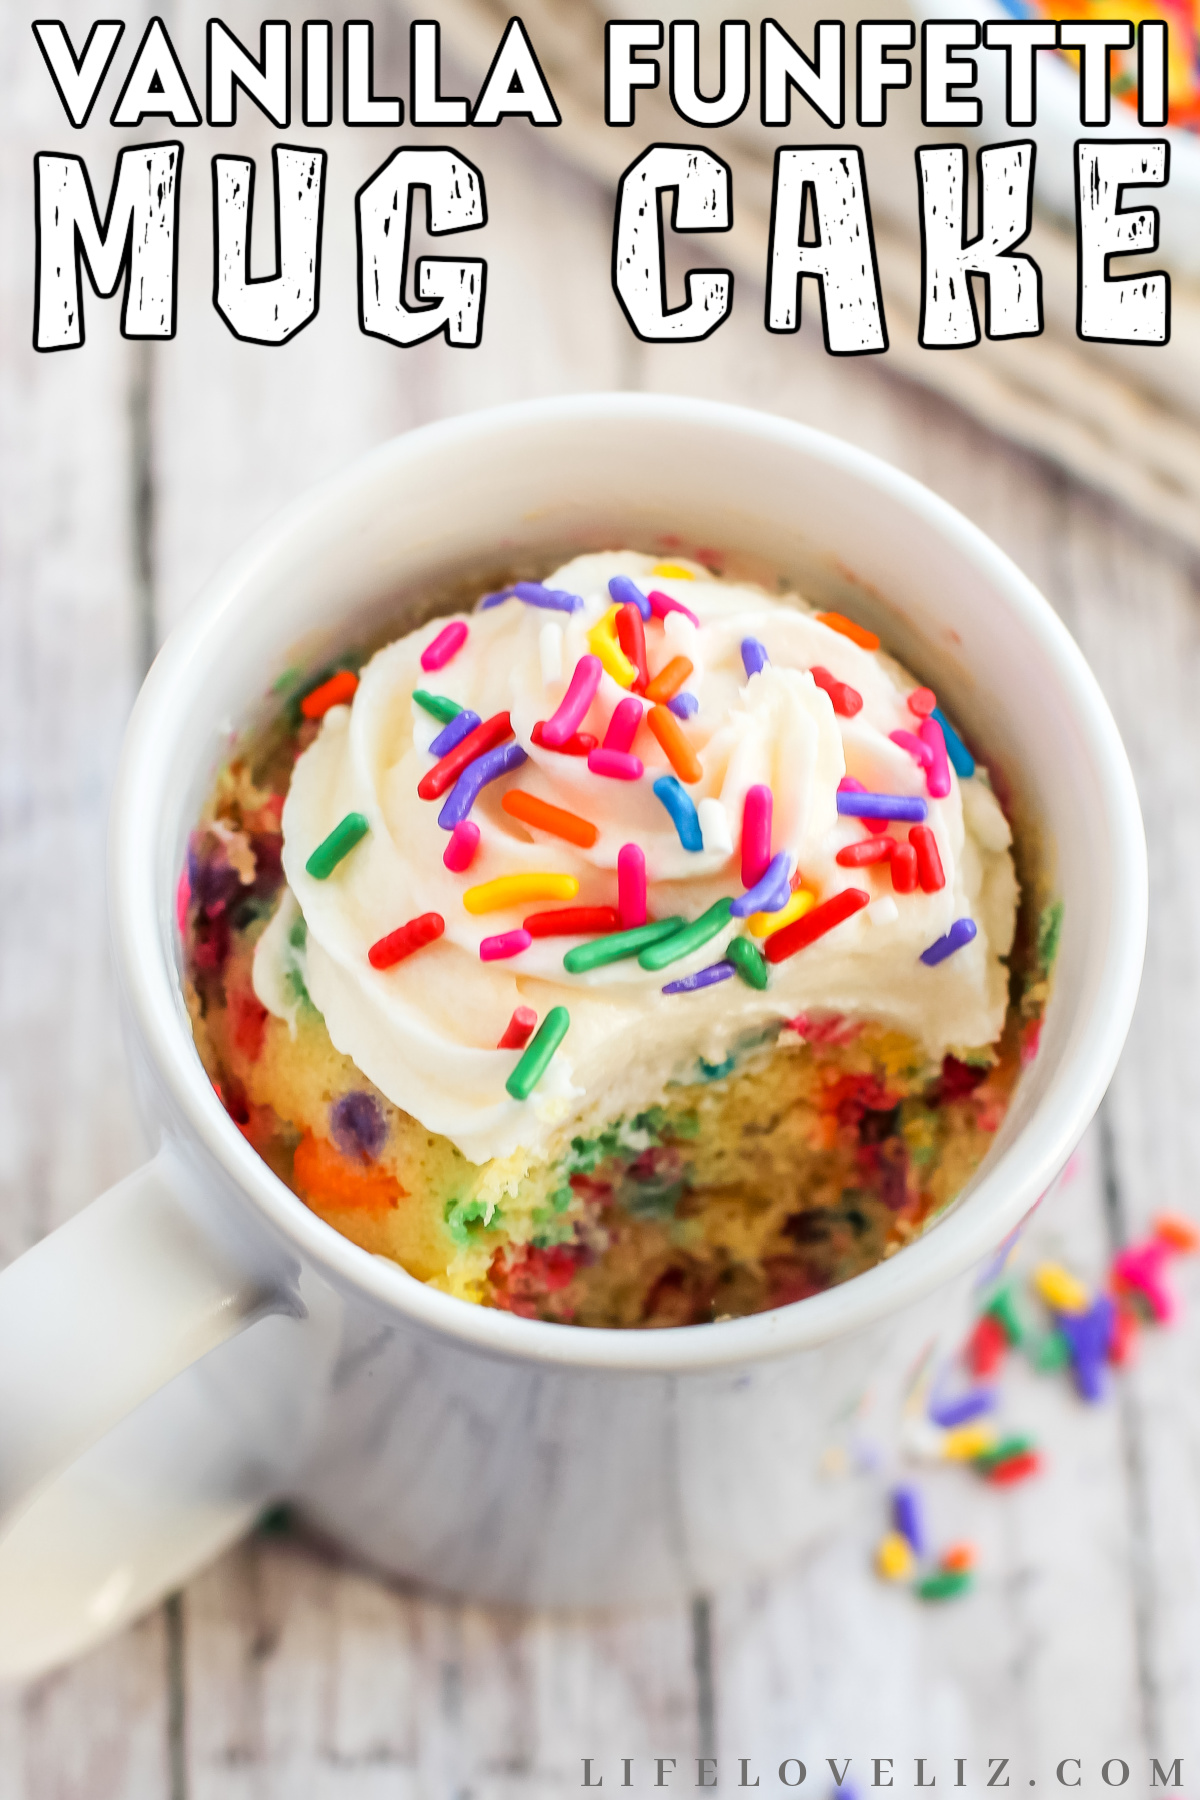 A sweet and simple vanilla funfetti mug cake recipe for the microwave! It's fluffy and moist, and topped with a dollop of buttercream!